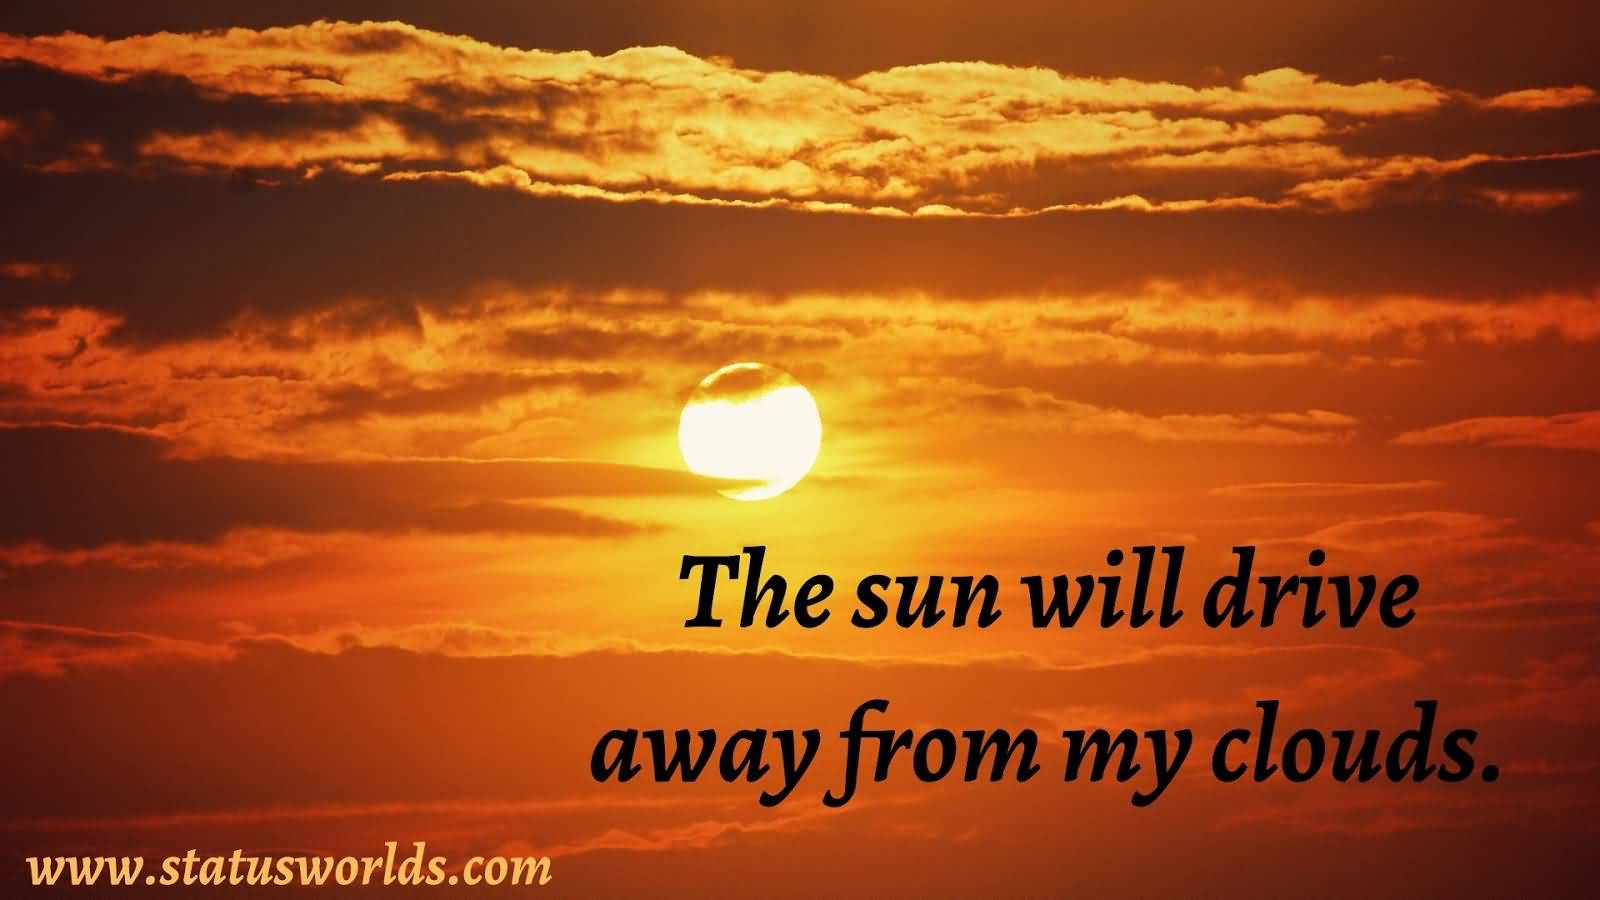 The Sun Will Drive Quotes About Sunshine